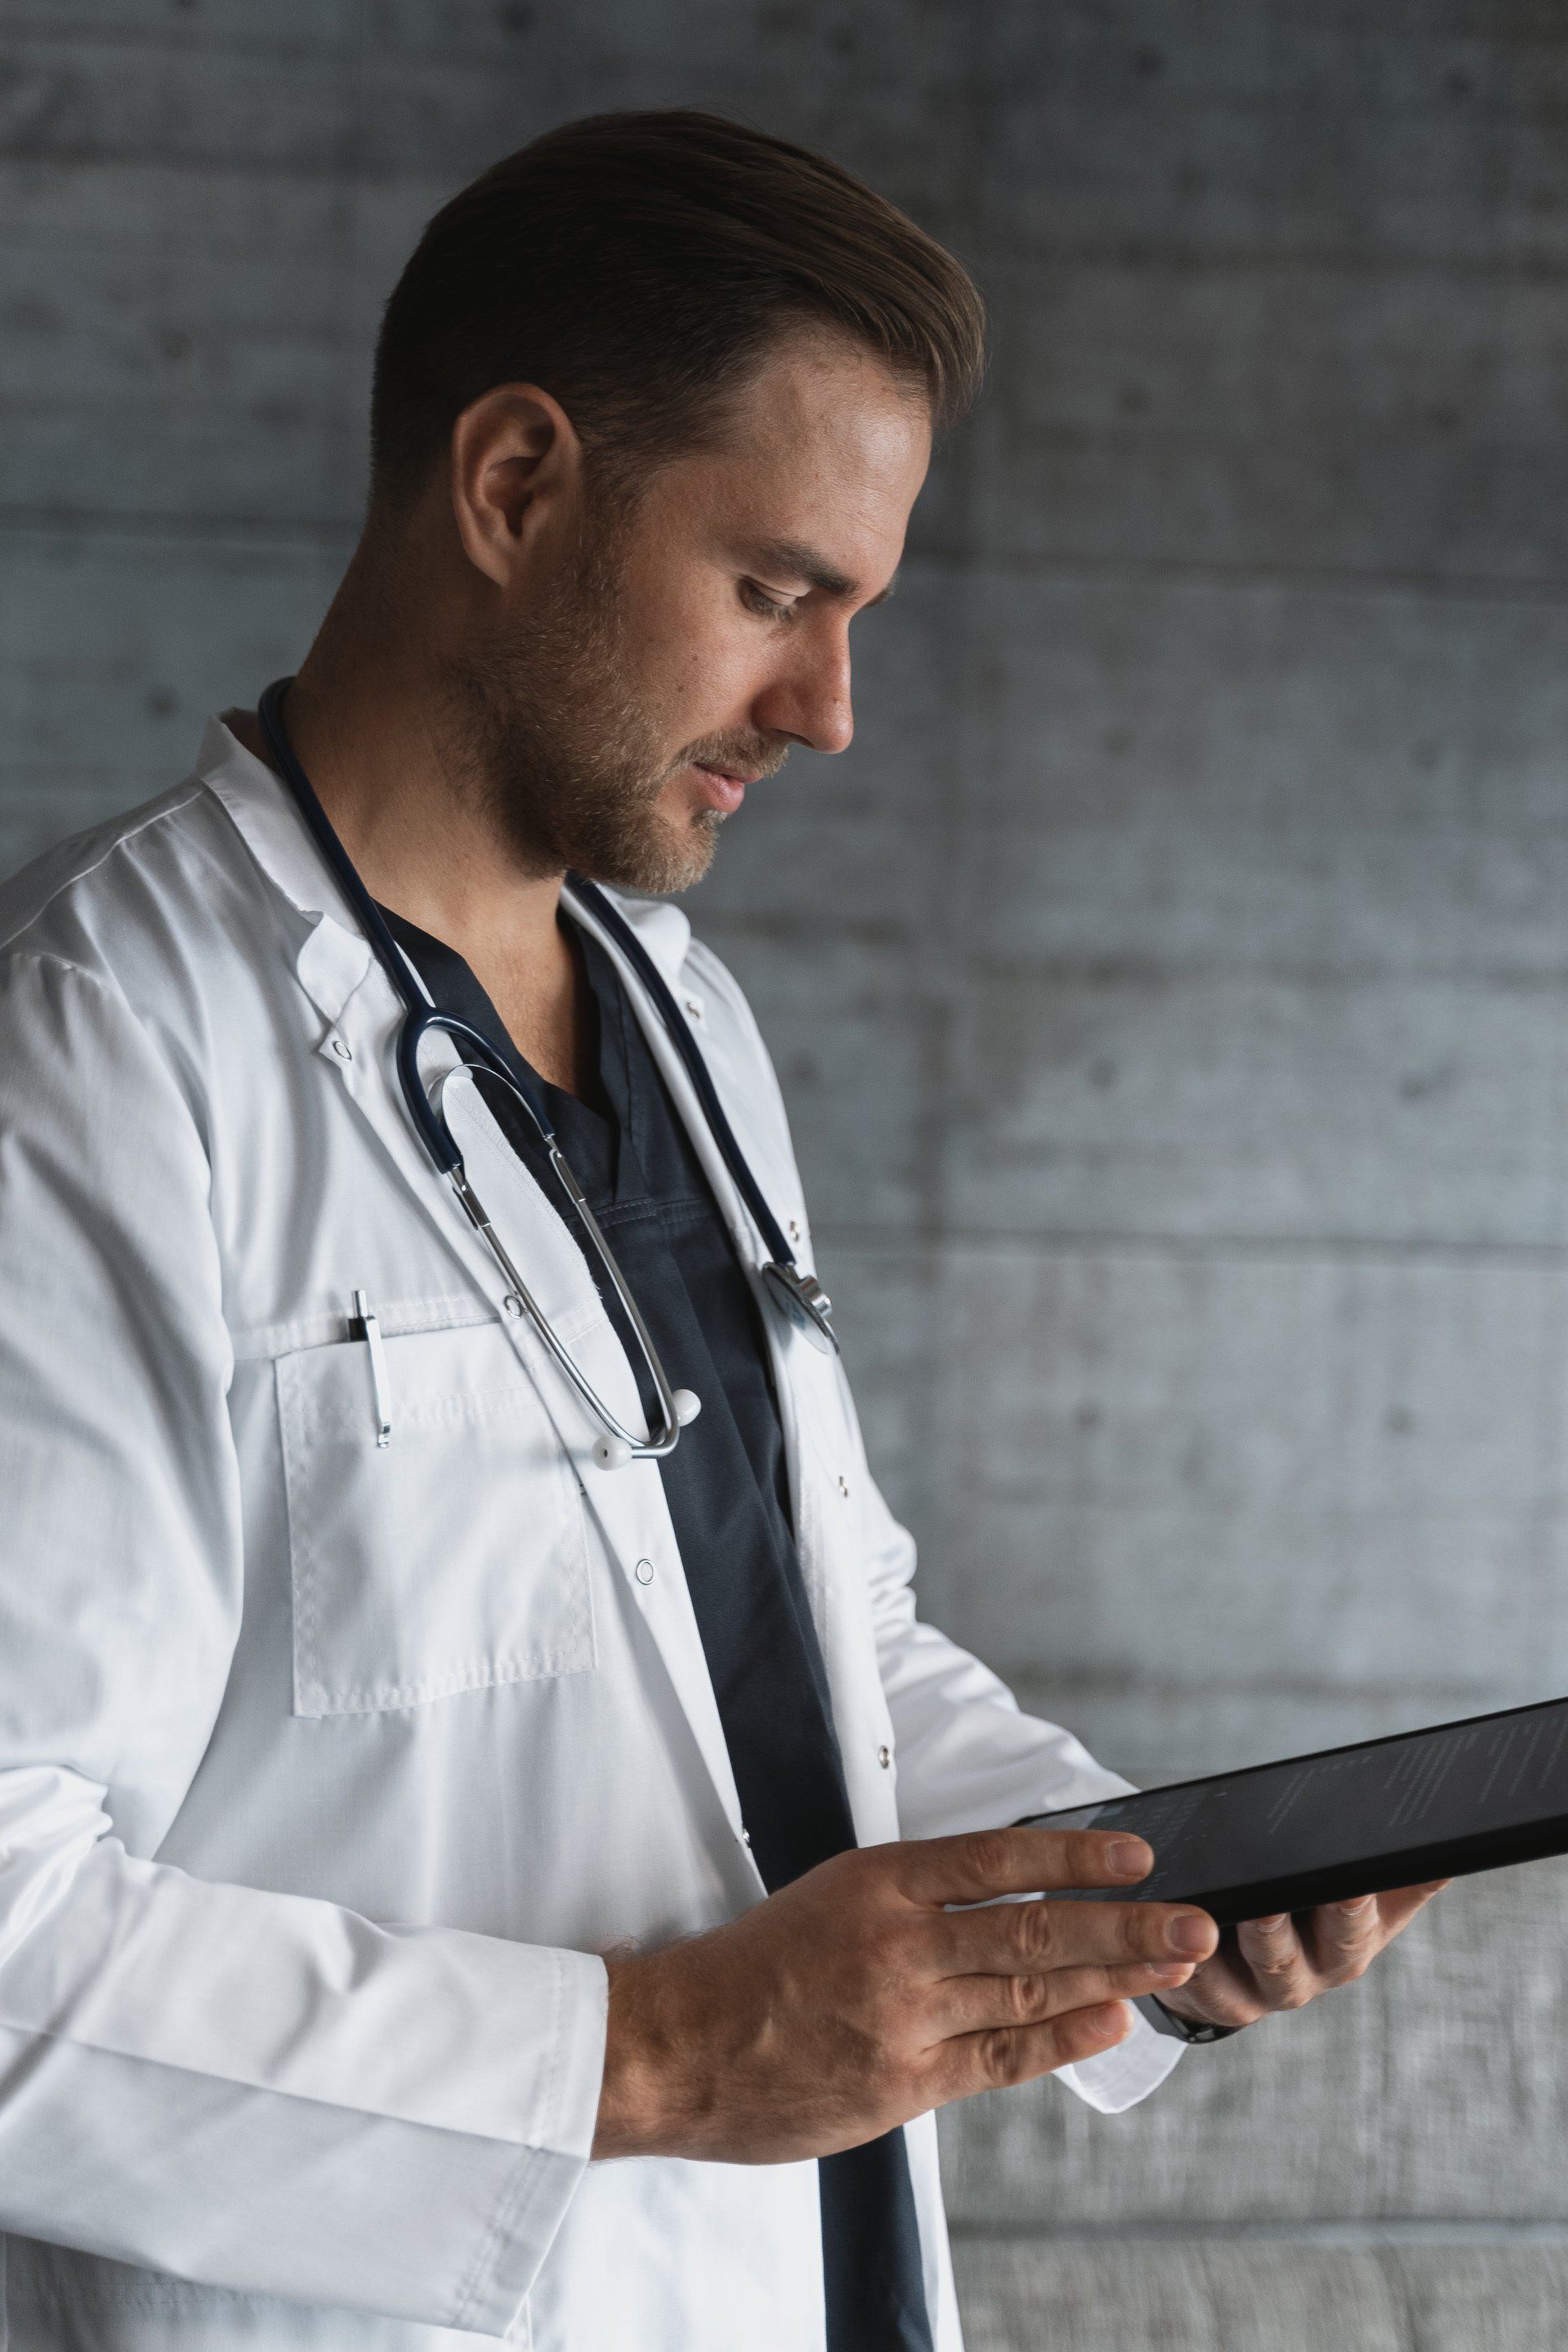 A doctor with a stethoscope around his neck is looking at a tablet computer.